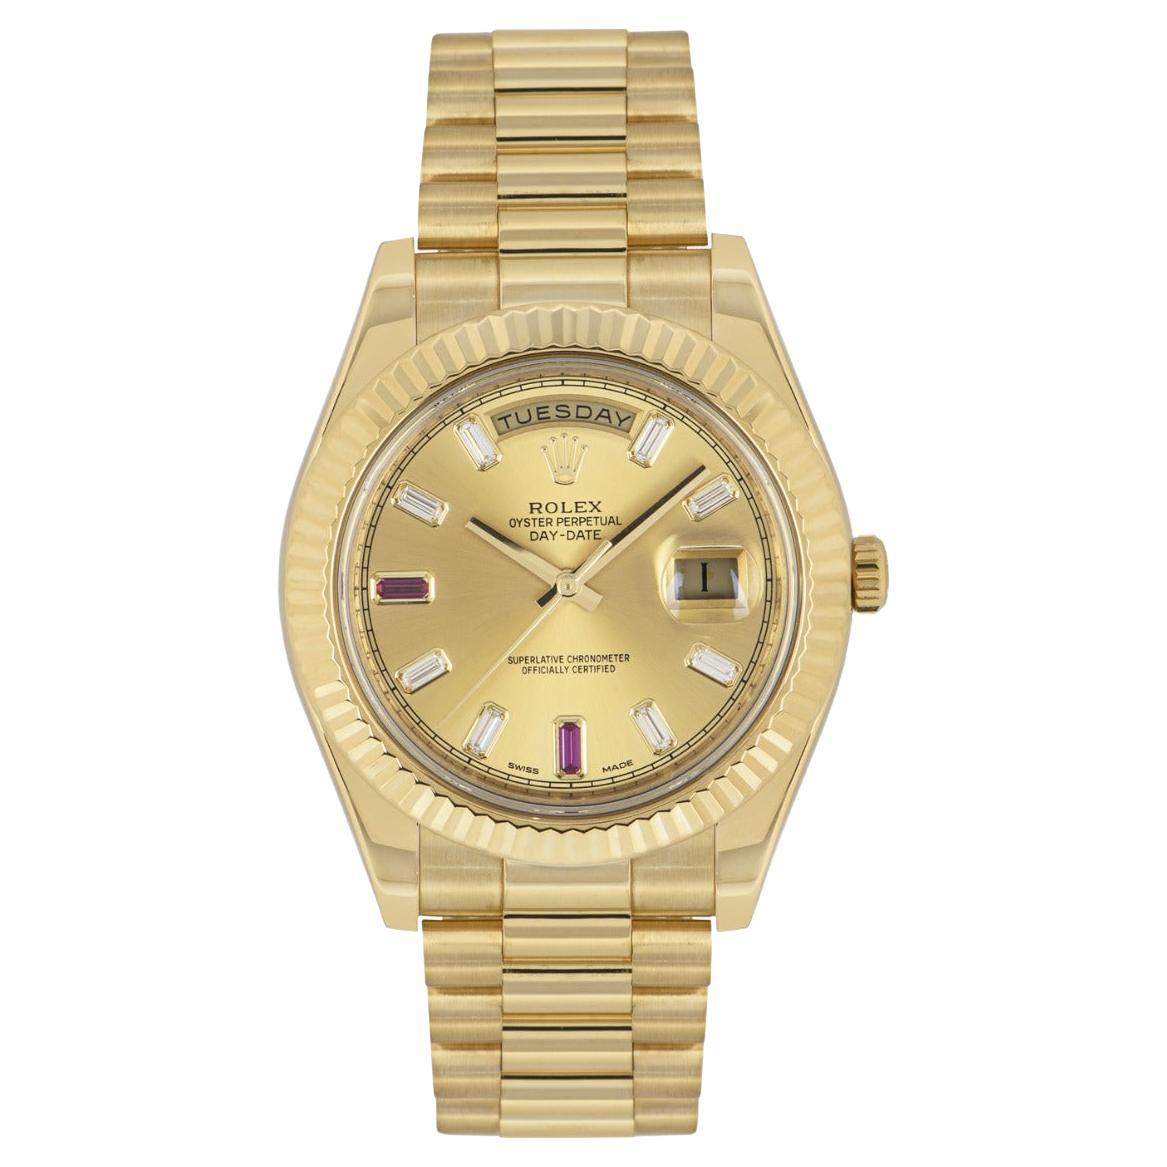 A yellow gold Day-Date II by Rolex. Features a champagne dial with 8 baguette cut diamonds and 2 baguette cut rubies. The fluted bezel, president bracelet and concealed folding Crownclasp are signature Day-Date characteristics. Fitted with scratch